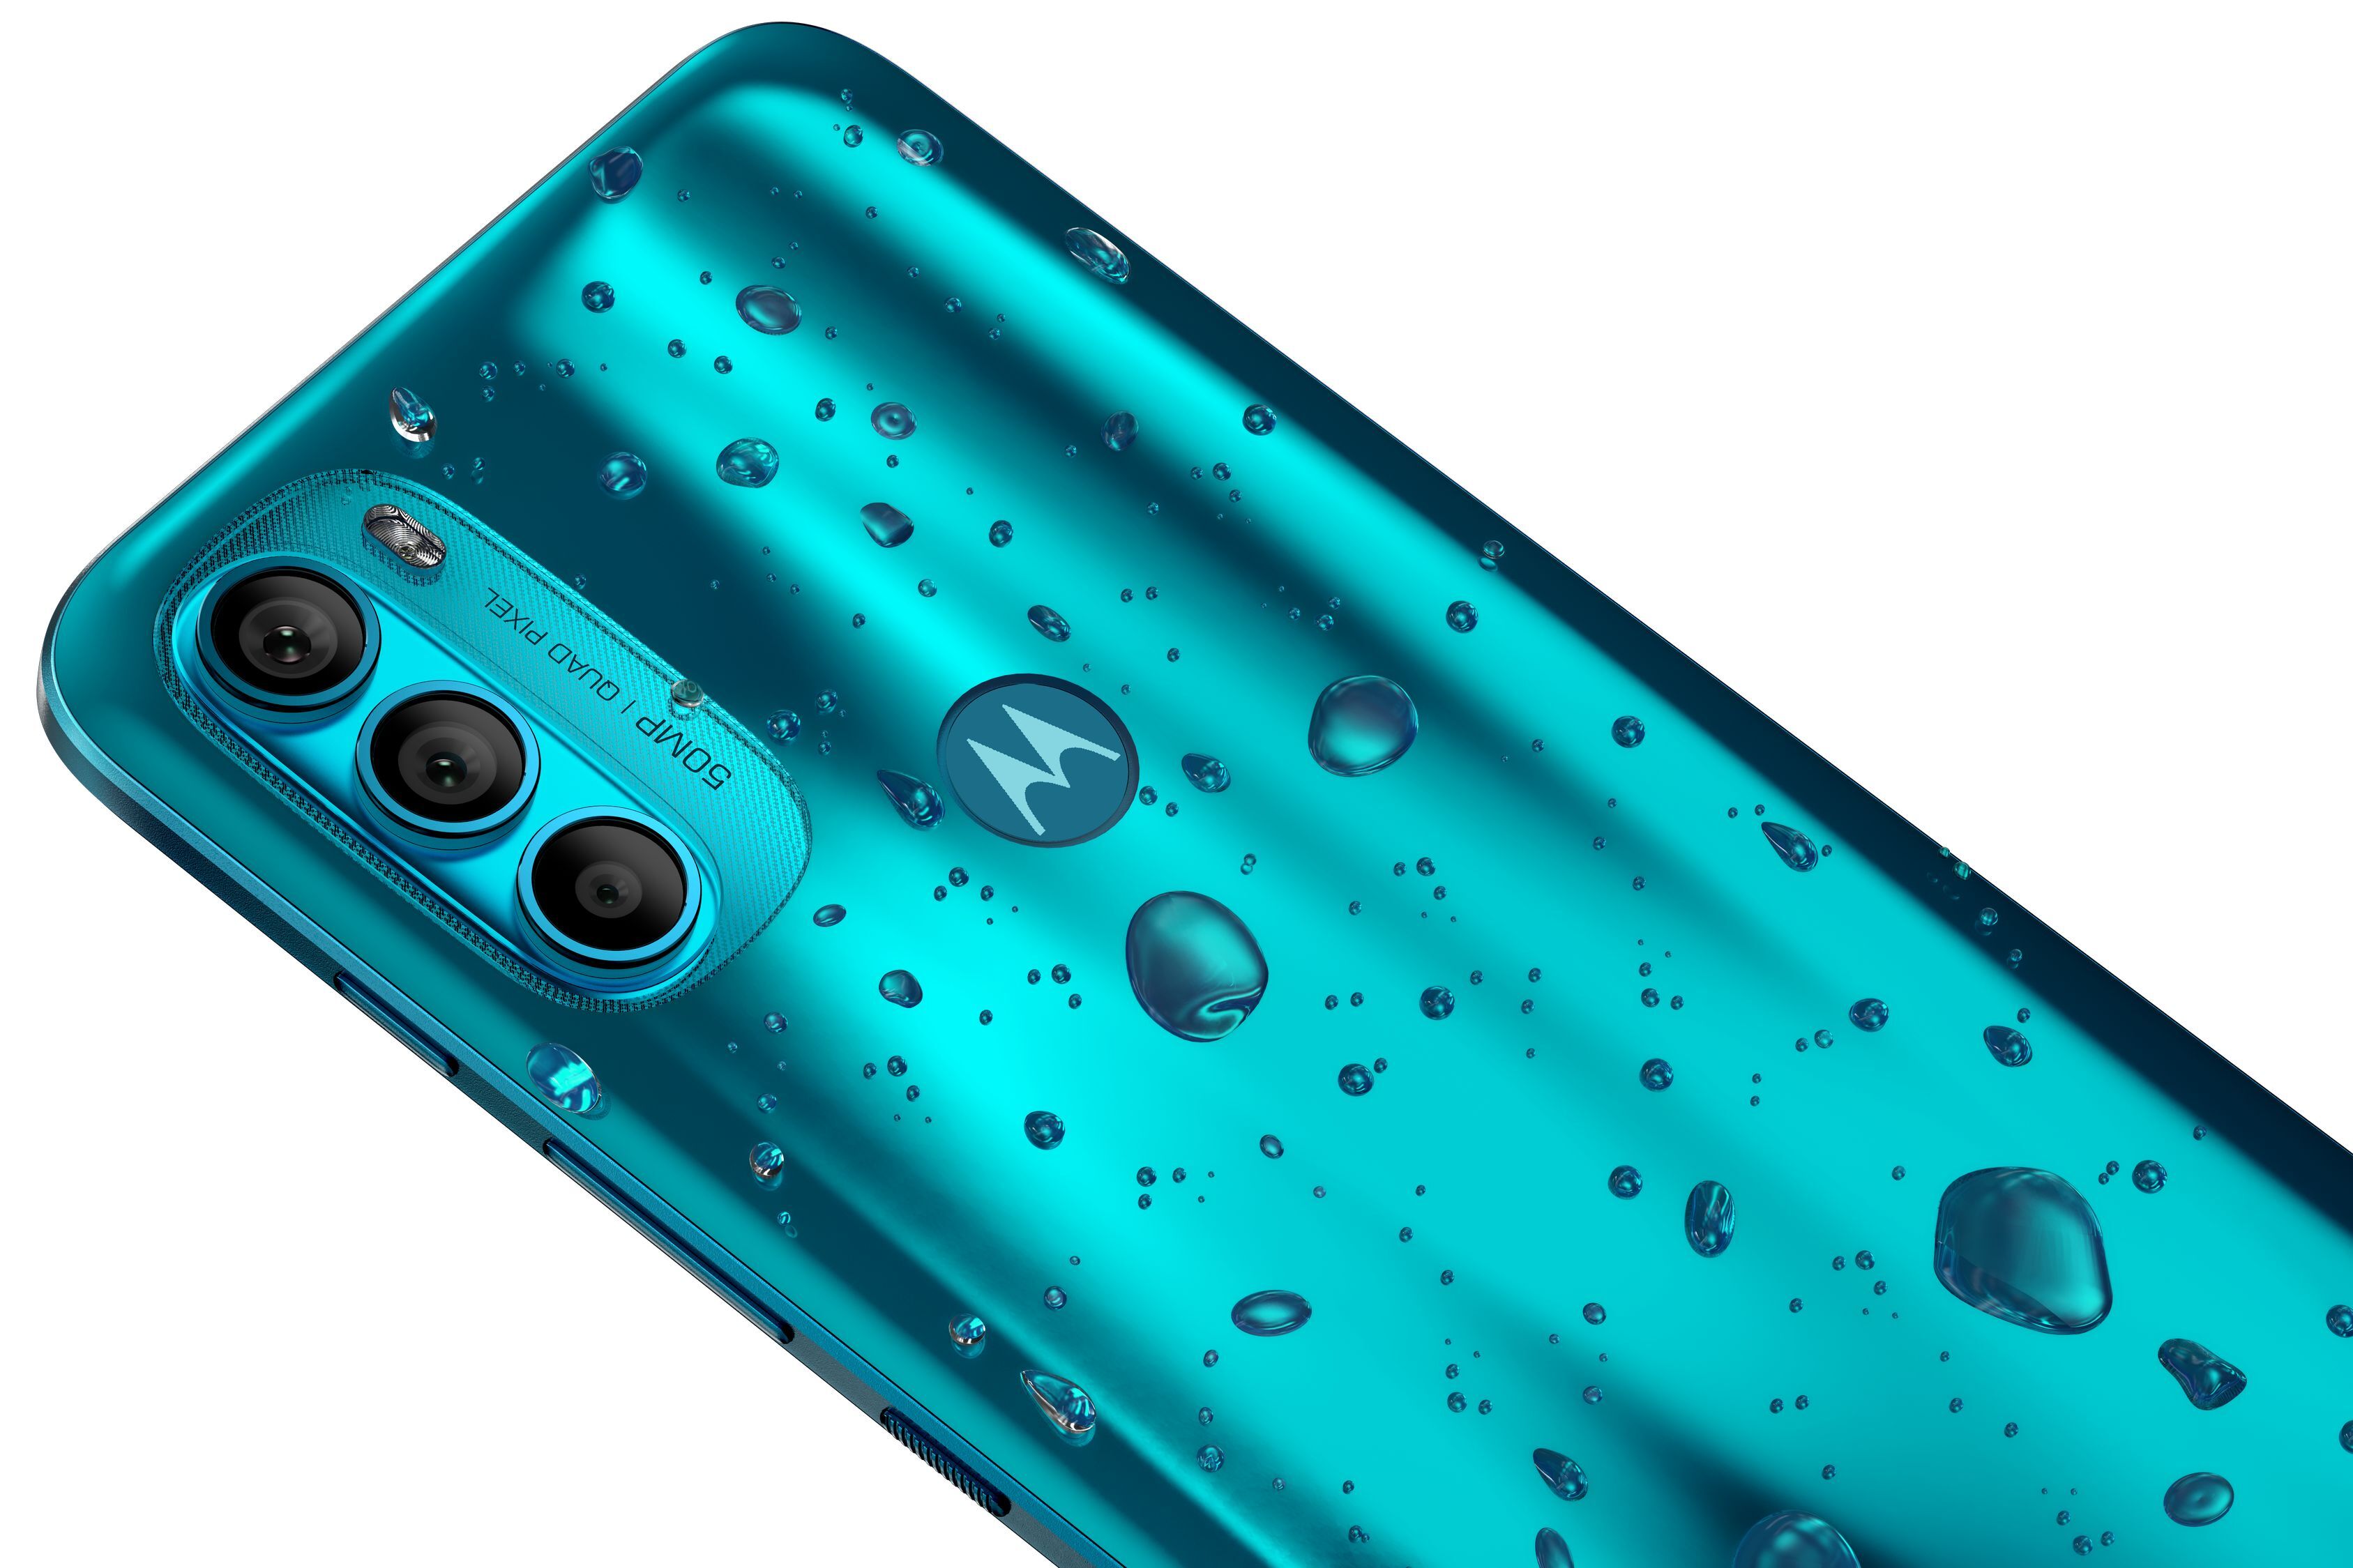 The Moto G71 is IP52 water resistant - Motorola’s new Moto G51 and G71 pack great specs at an affordable price